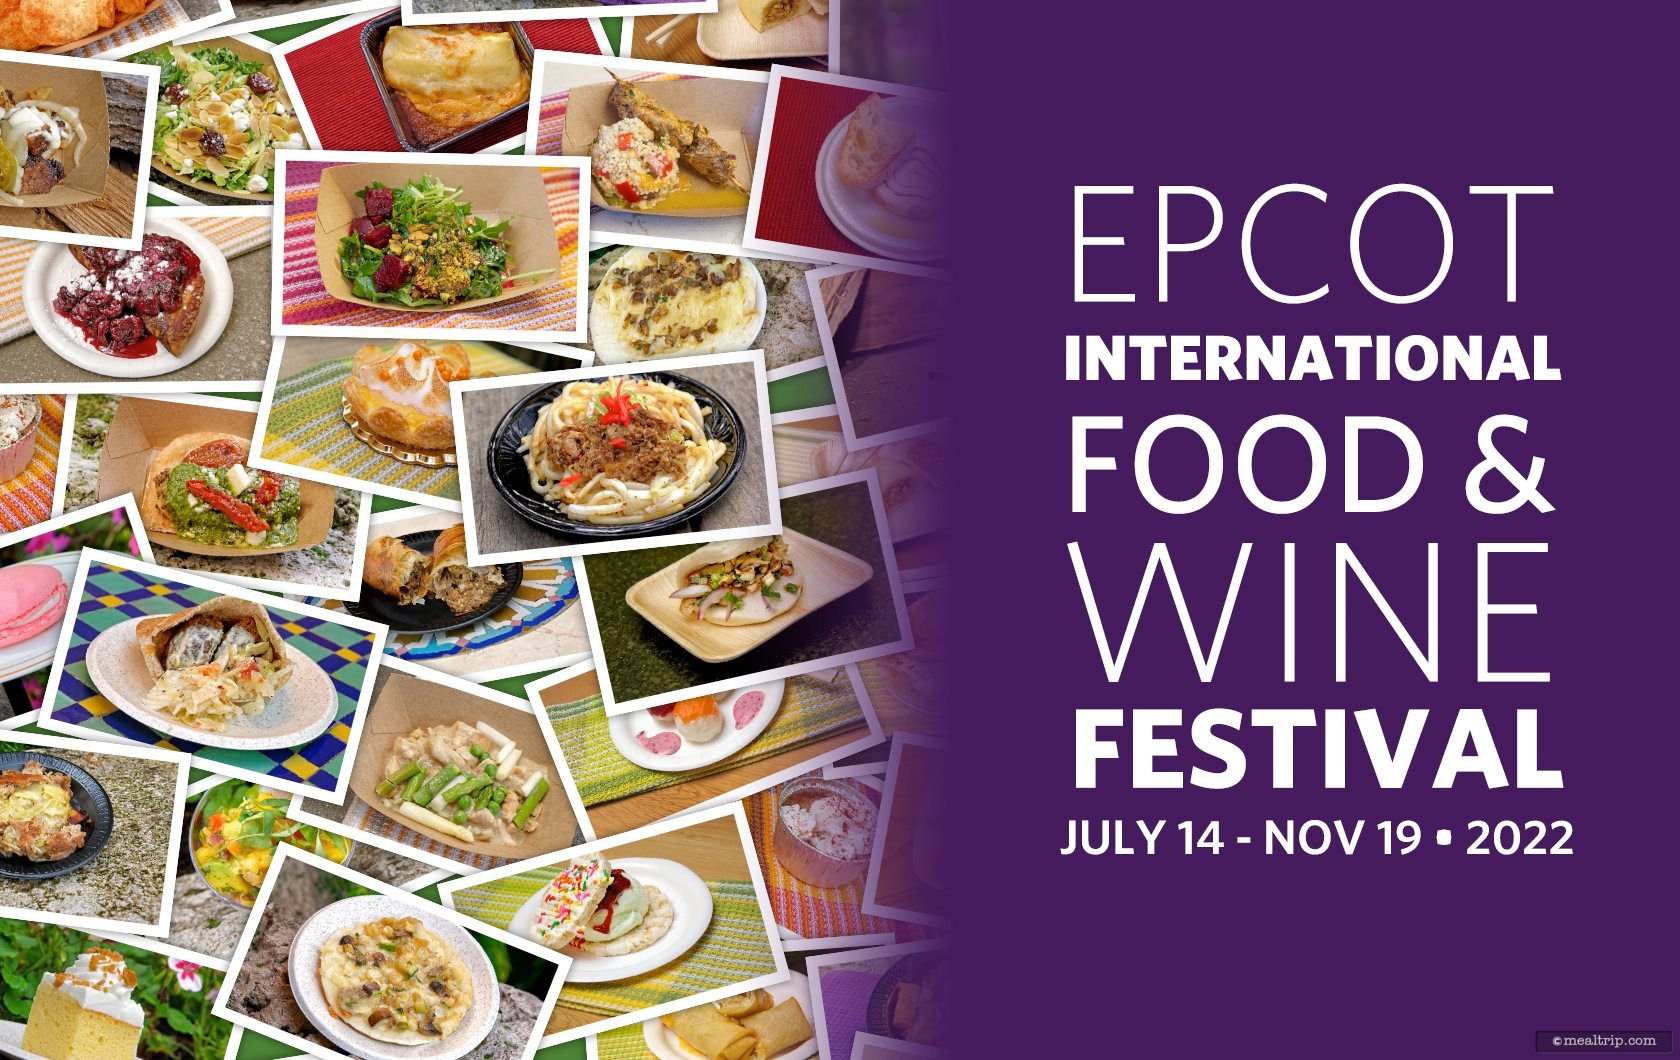  Menu Items and Booth Names for the 2022 Epcot International Food and Wine Festival